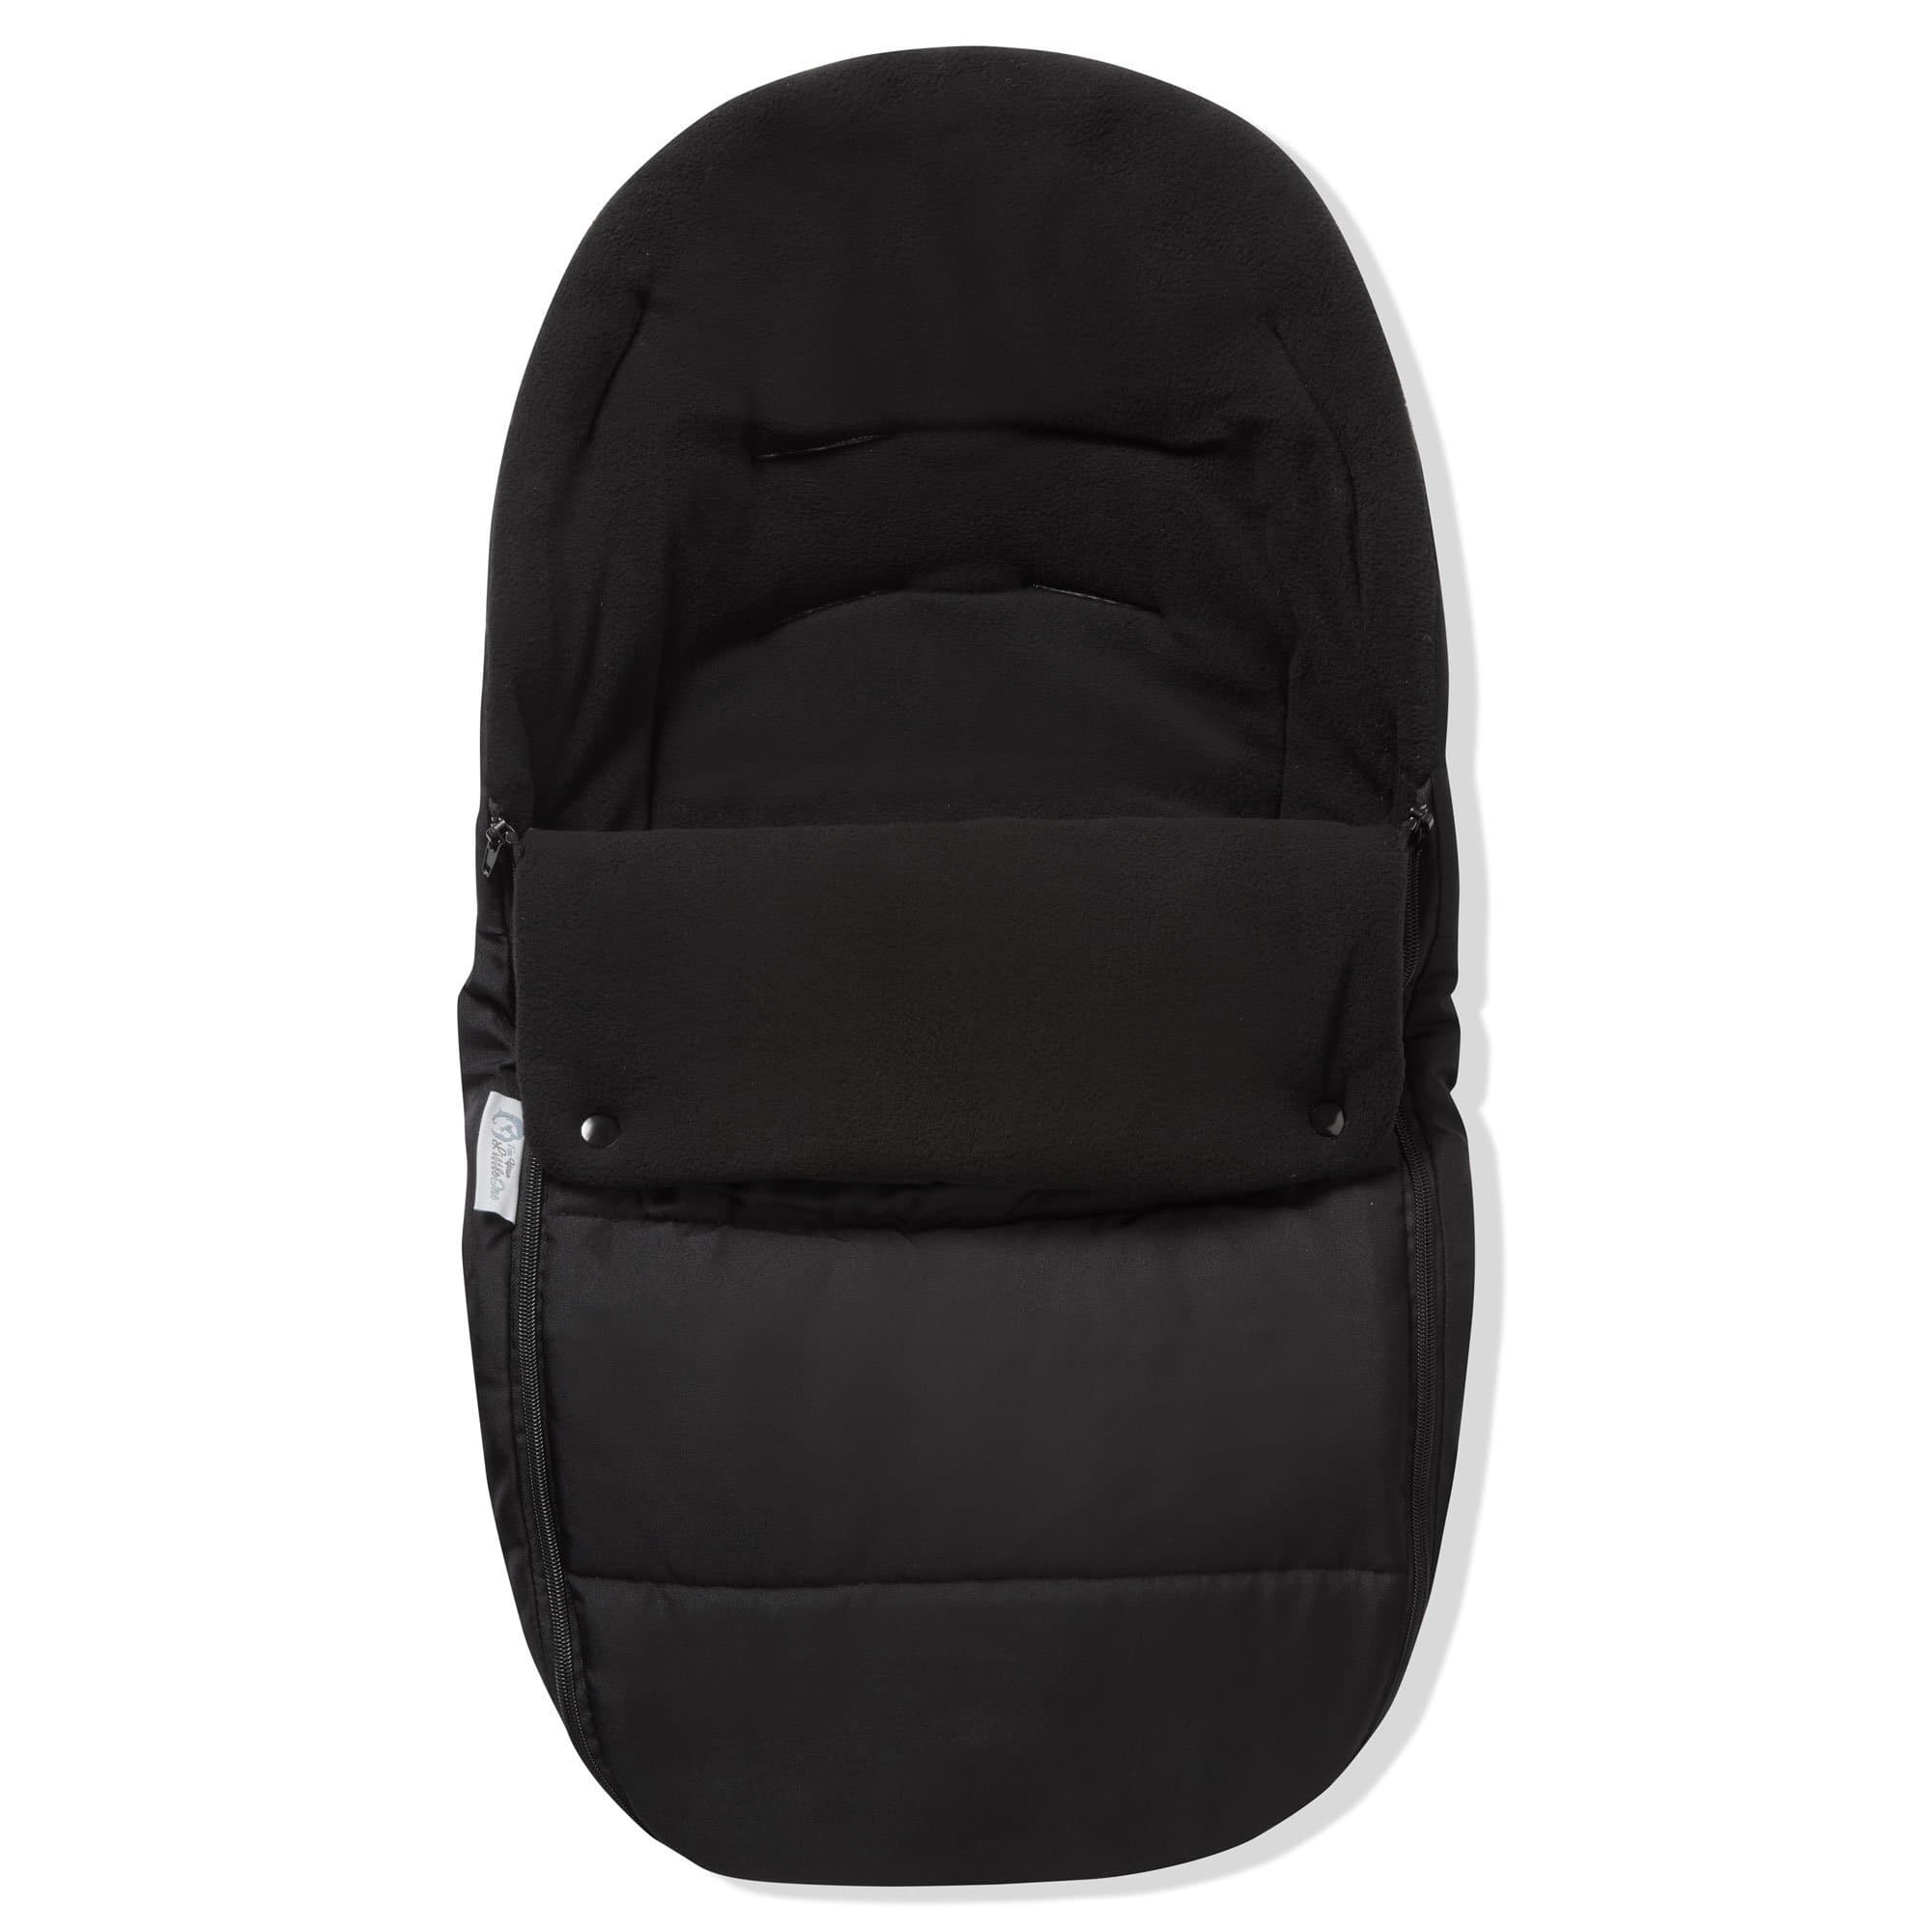 Premium Car Seat Footmuff / Cosy Toes Compatible With Baby Jogger - Black Jack / Fits All Models | For Your Little One